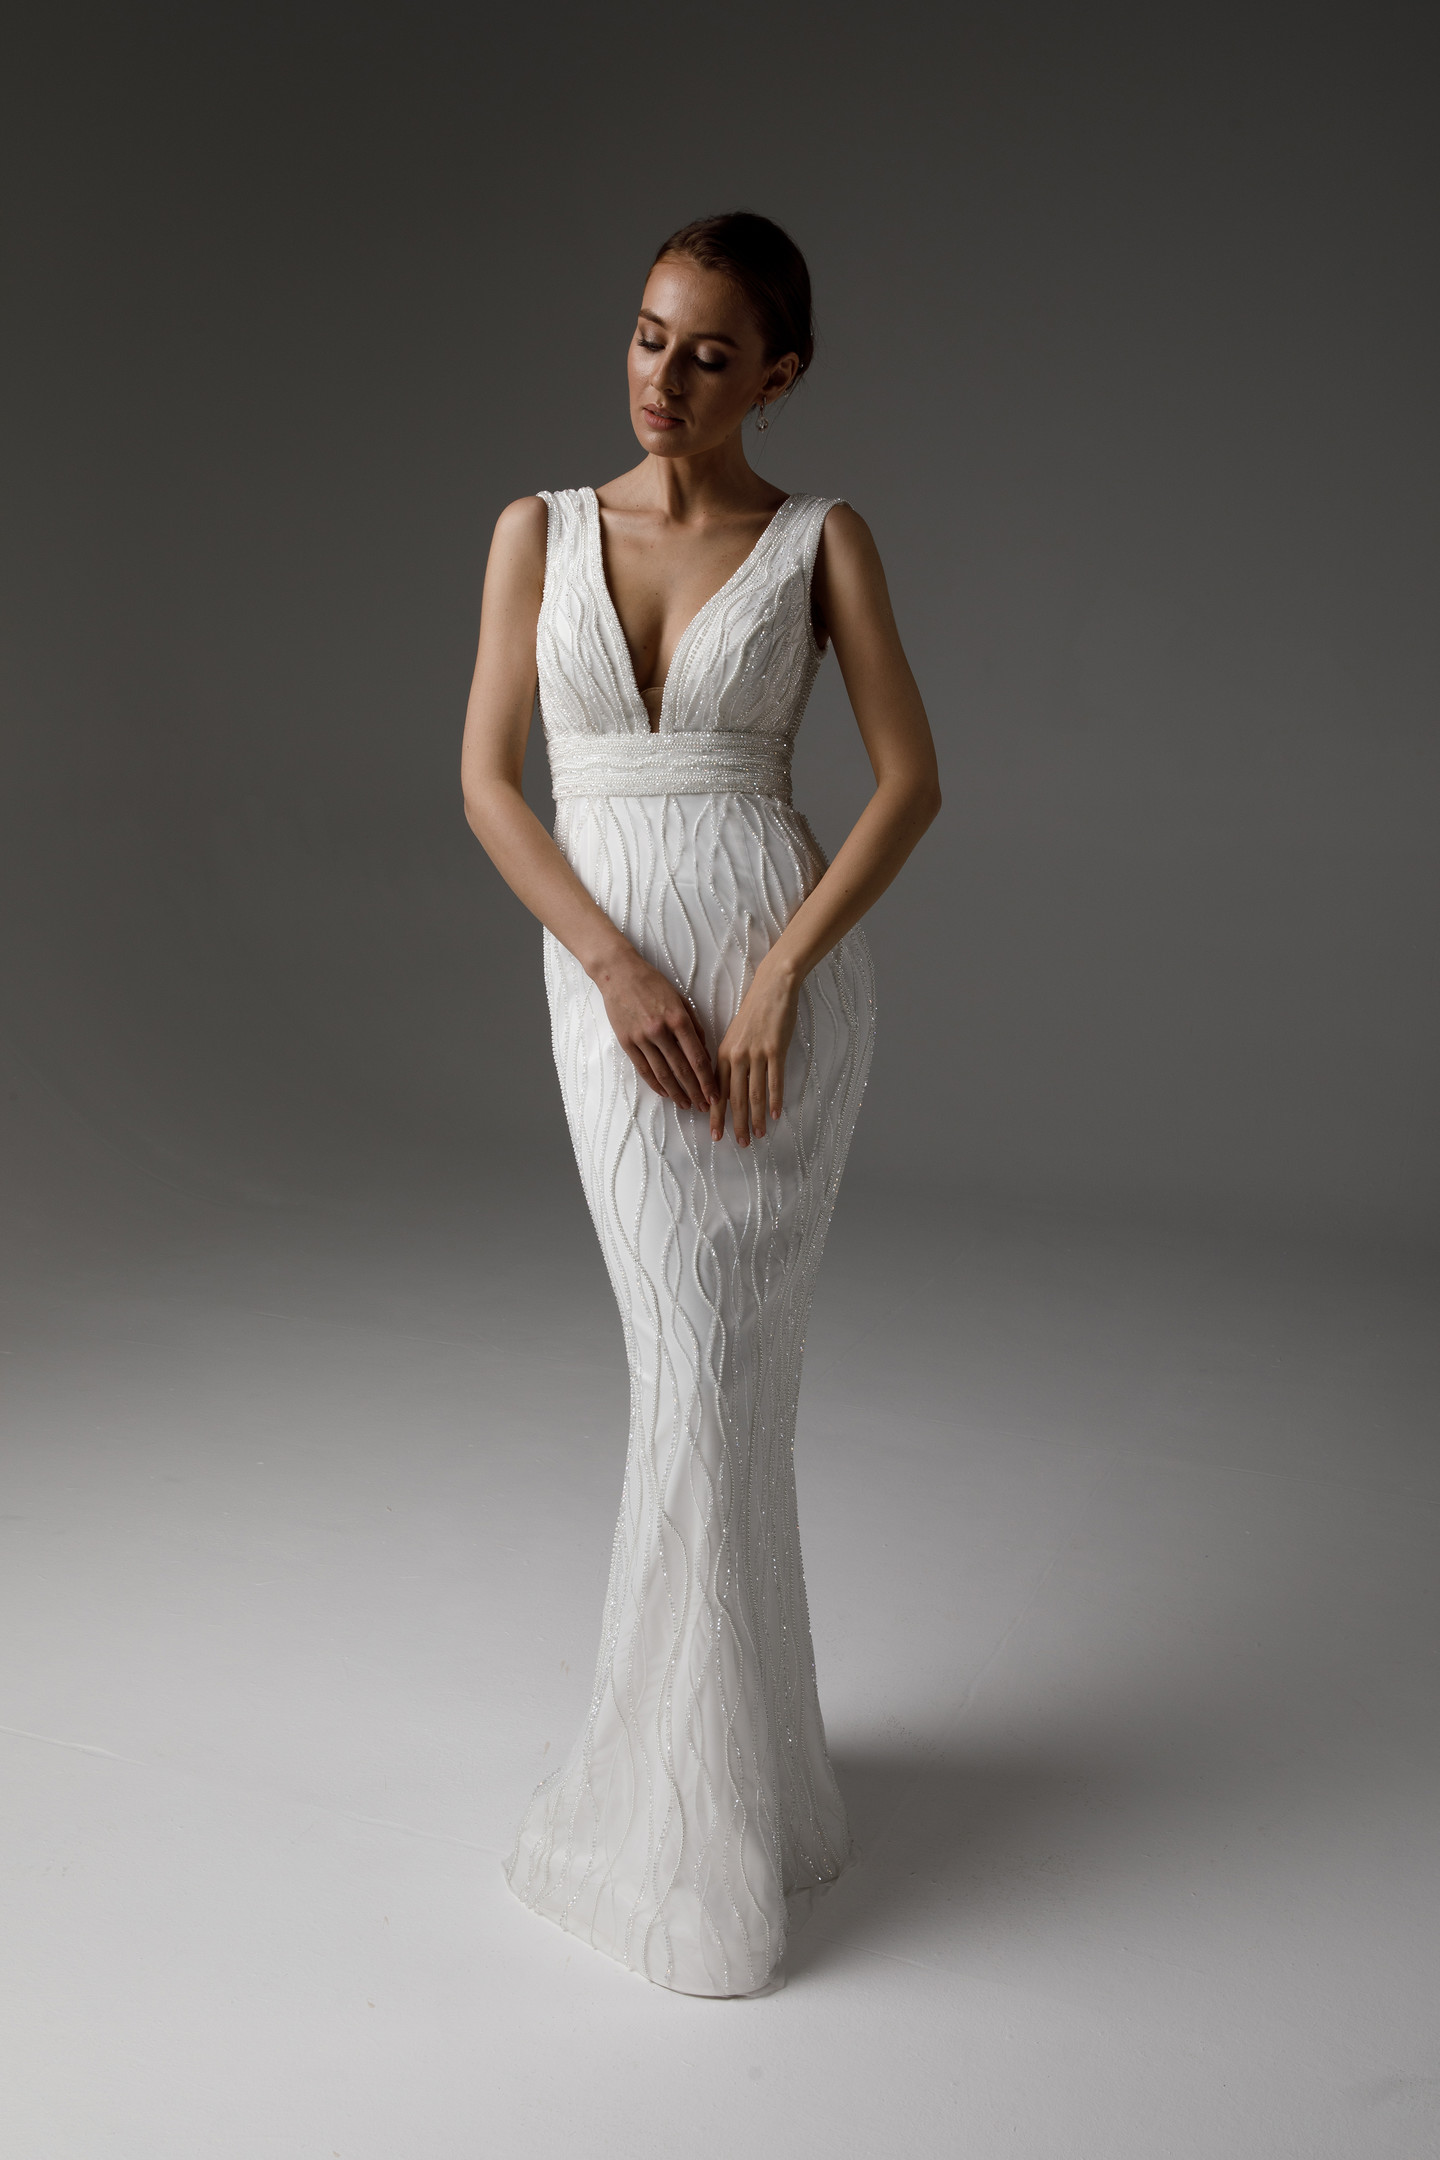 Runa gown, 2021, couture, dress, bridal, off-white, embroidery, sheath silhouette, popular